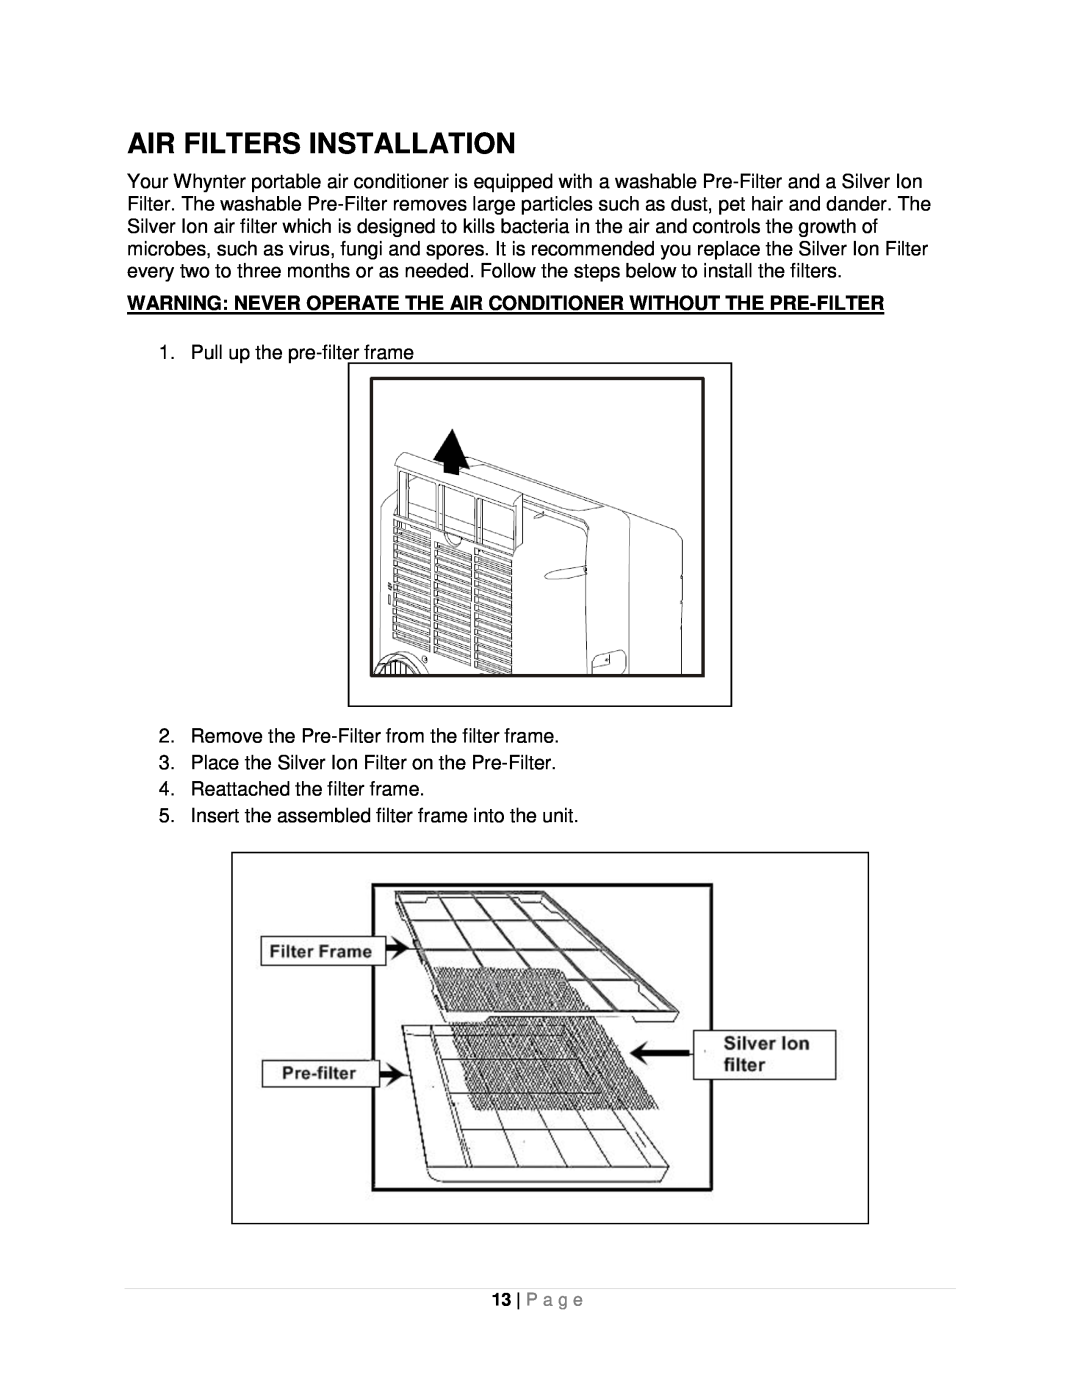 Whynter ARC-10WB instruction manual Air Filters Installation 